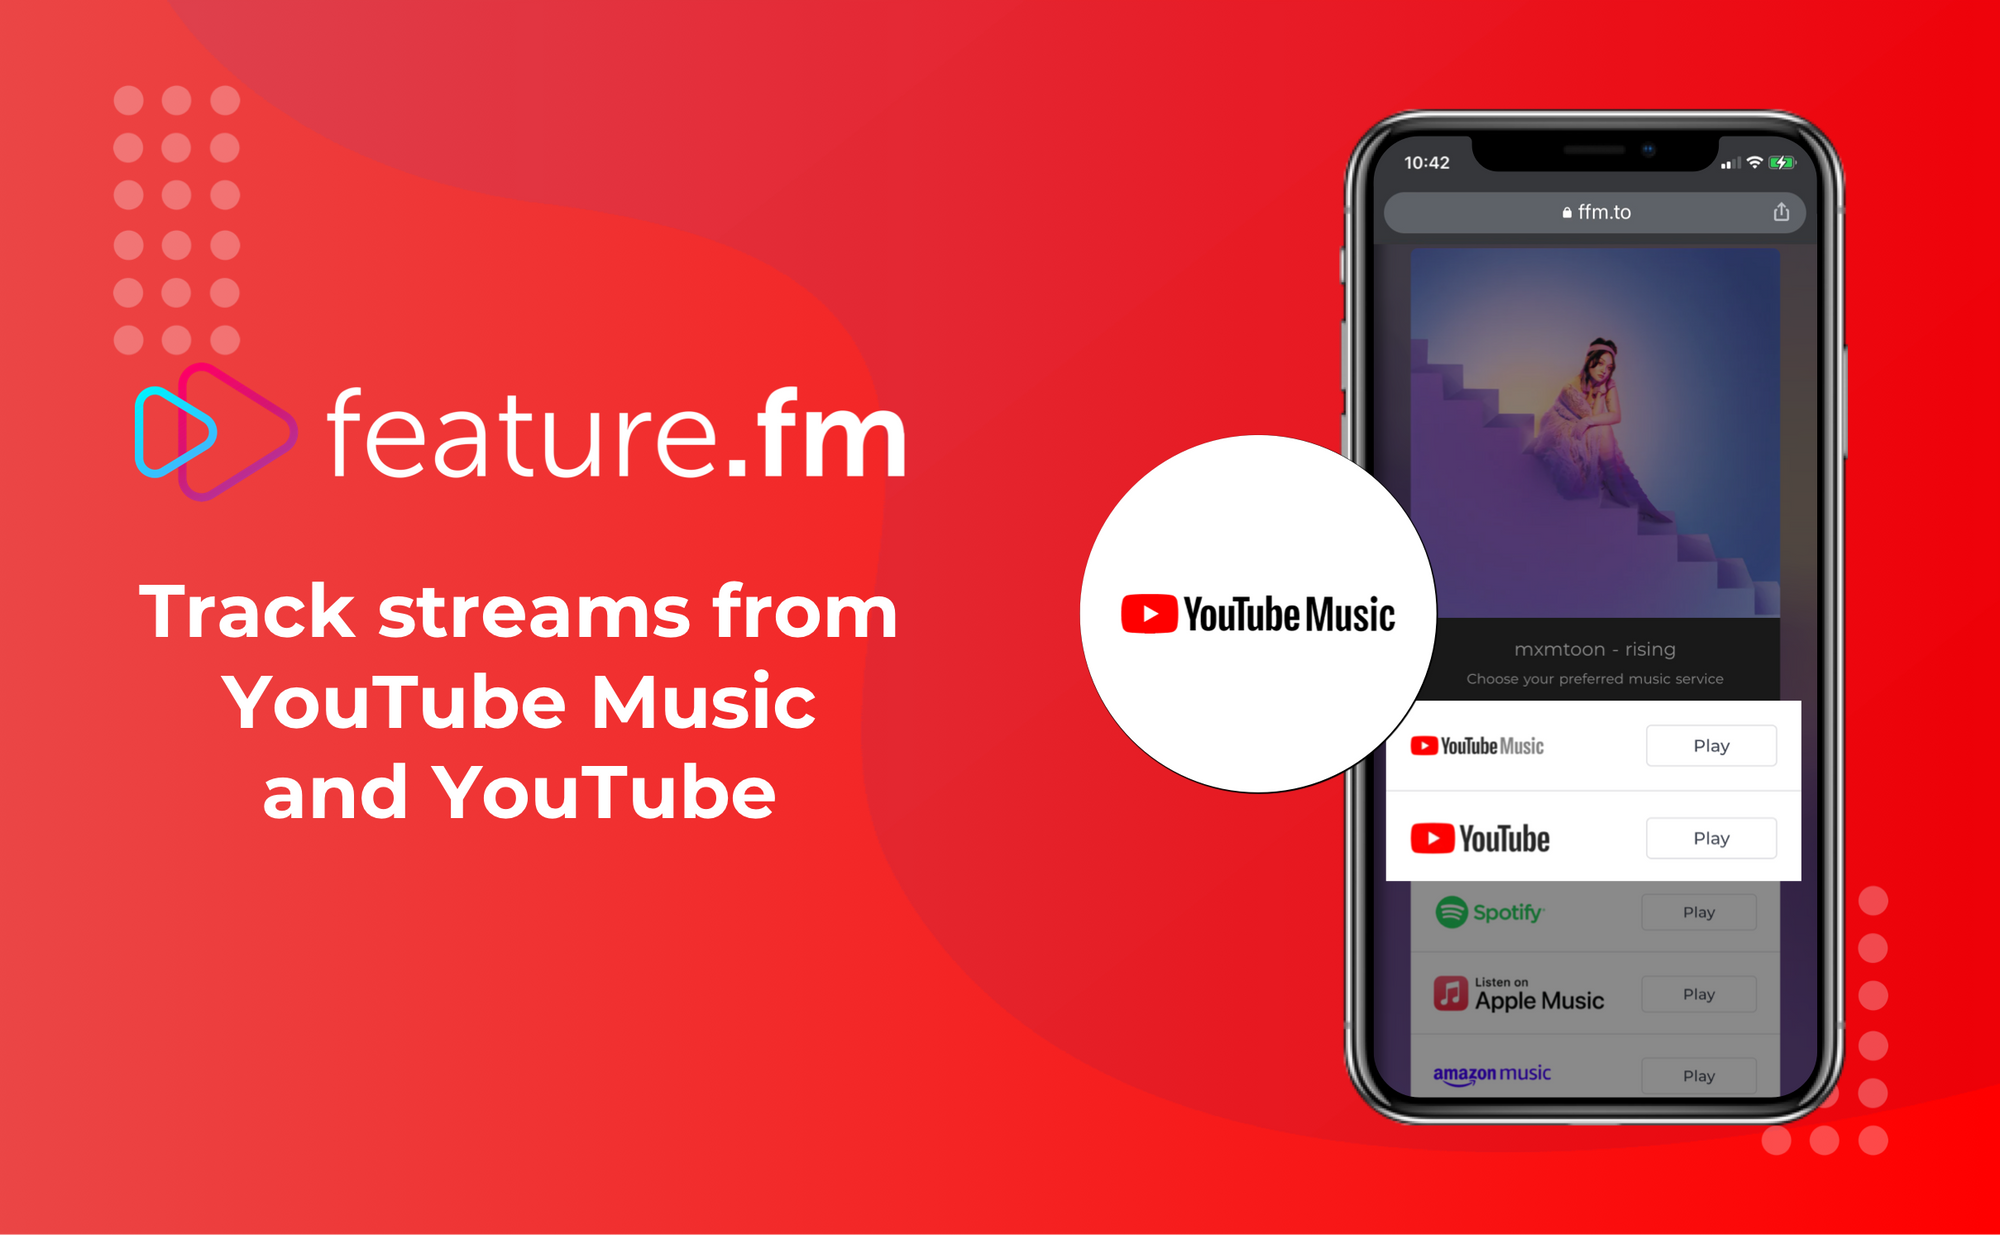 Track streams from YouTube Music and YouTube